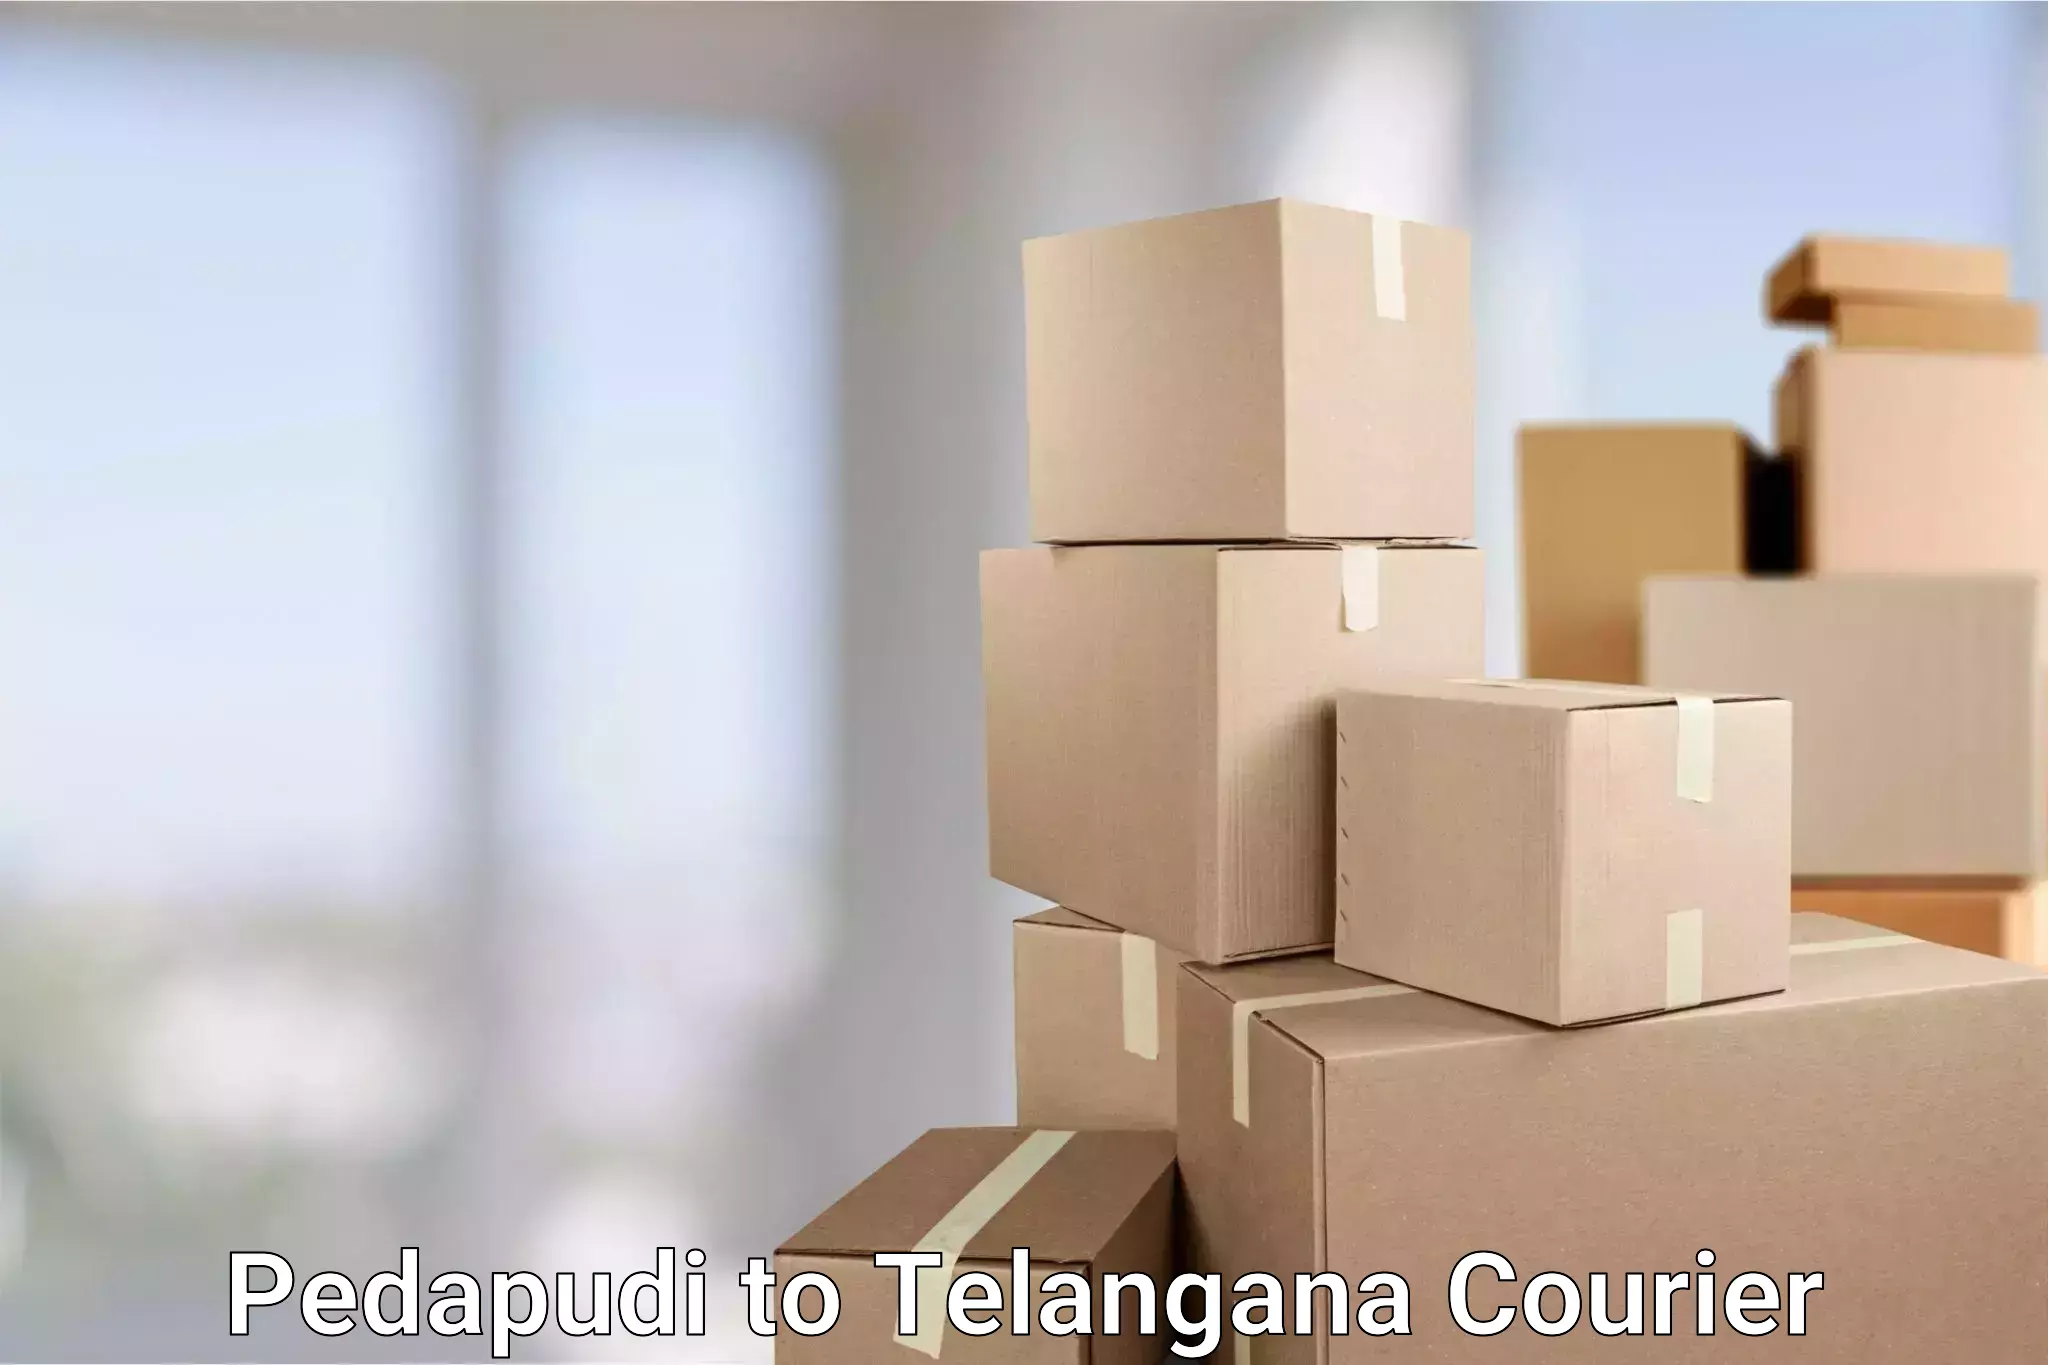 Personal parcel delivery in Pedapudi to Sirikonda